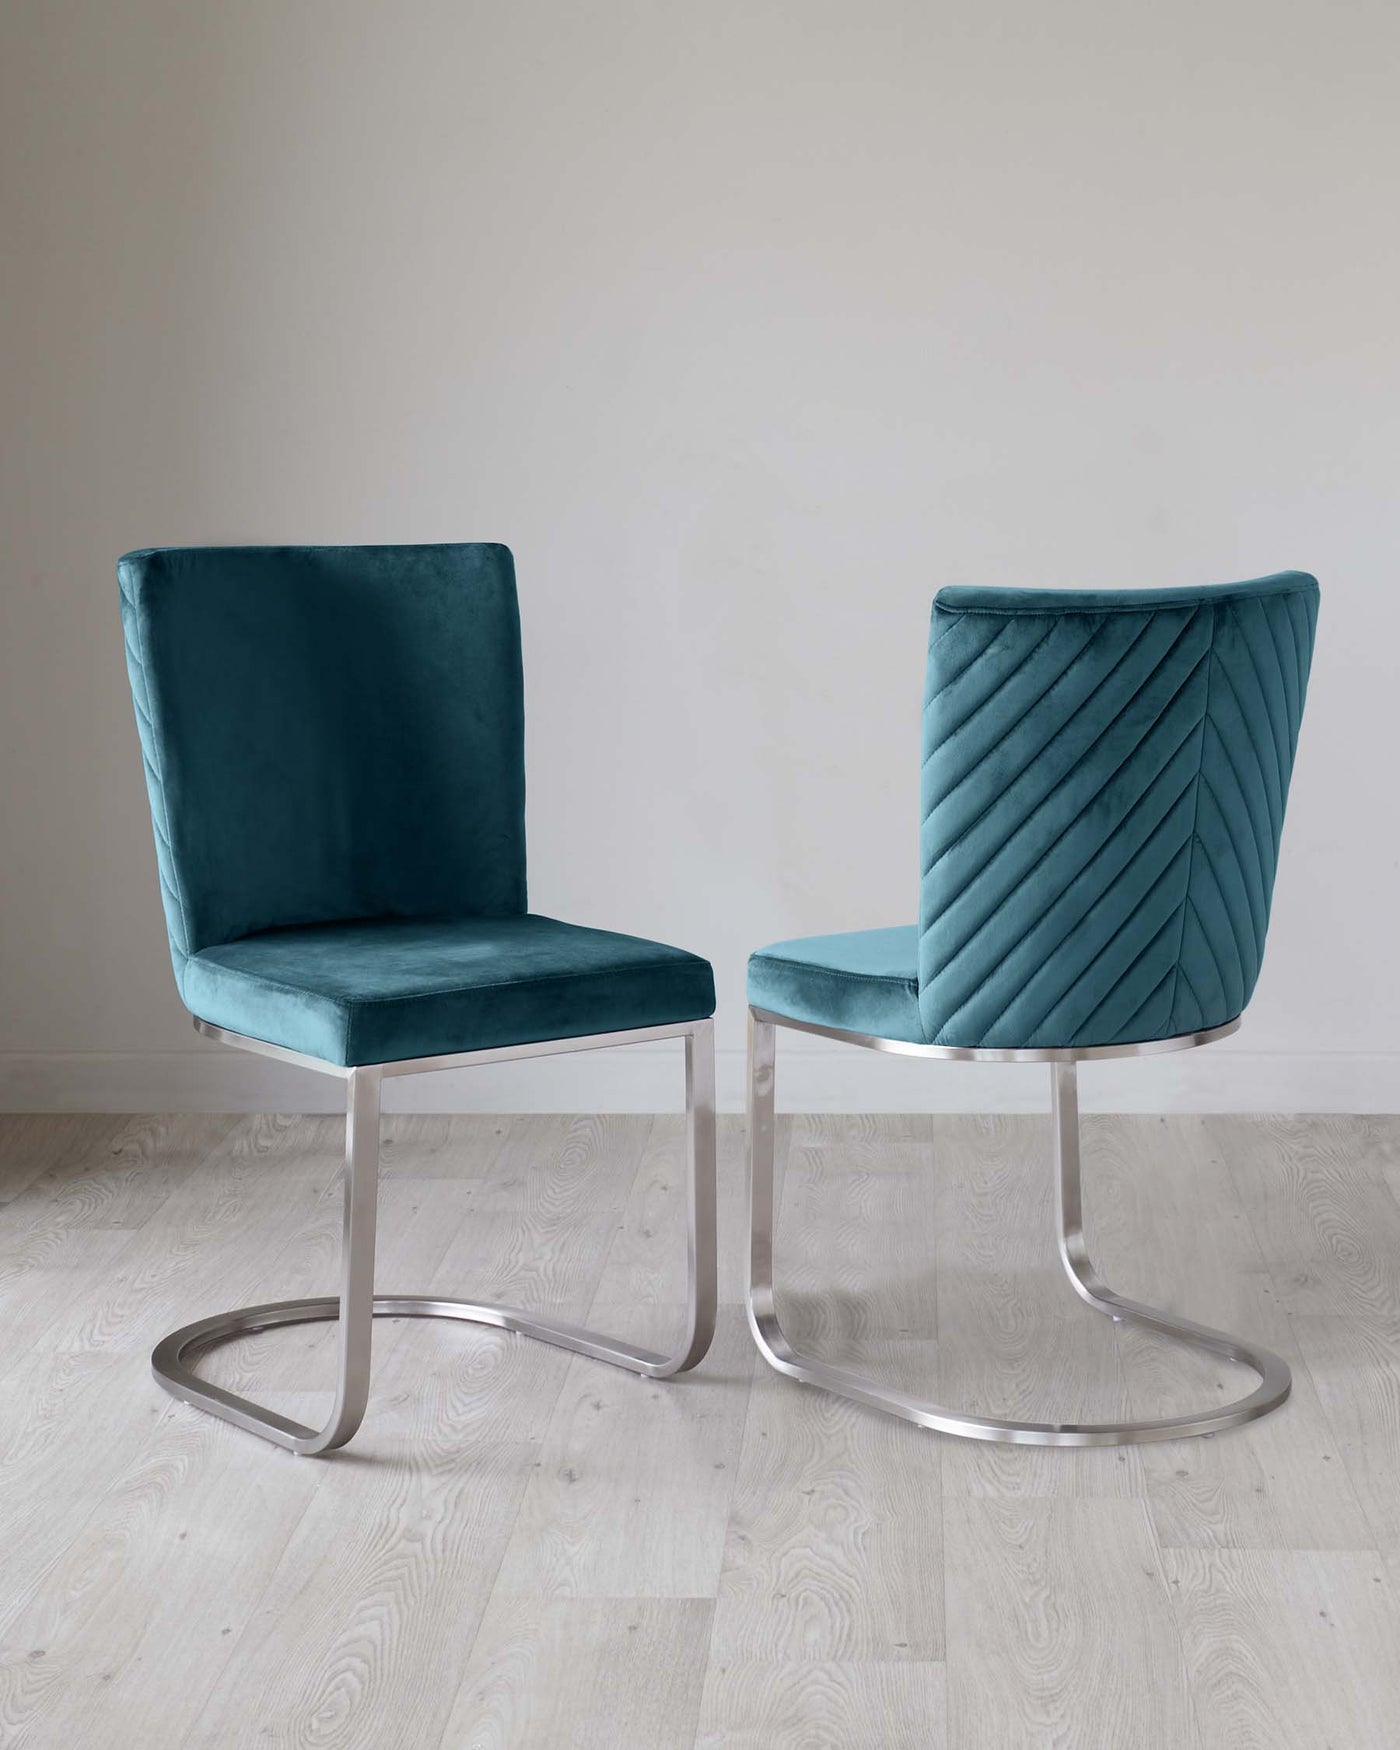 Two contemporary, teal velvet chairs with unique cantilevered metal bases against a neutral wall and light wood flooring. The chair on the right features an elegant pleated design on the backrest.